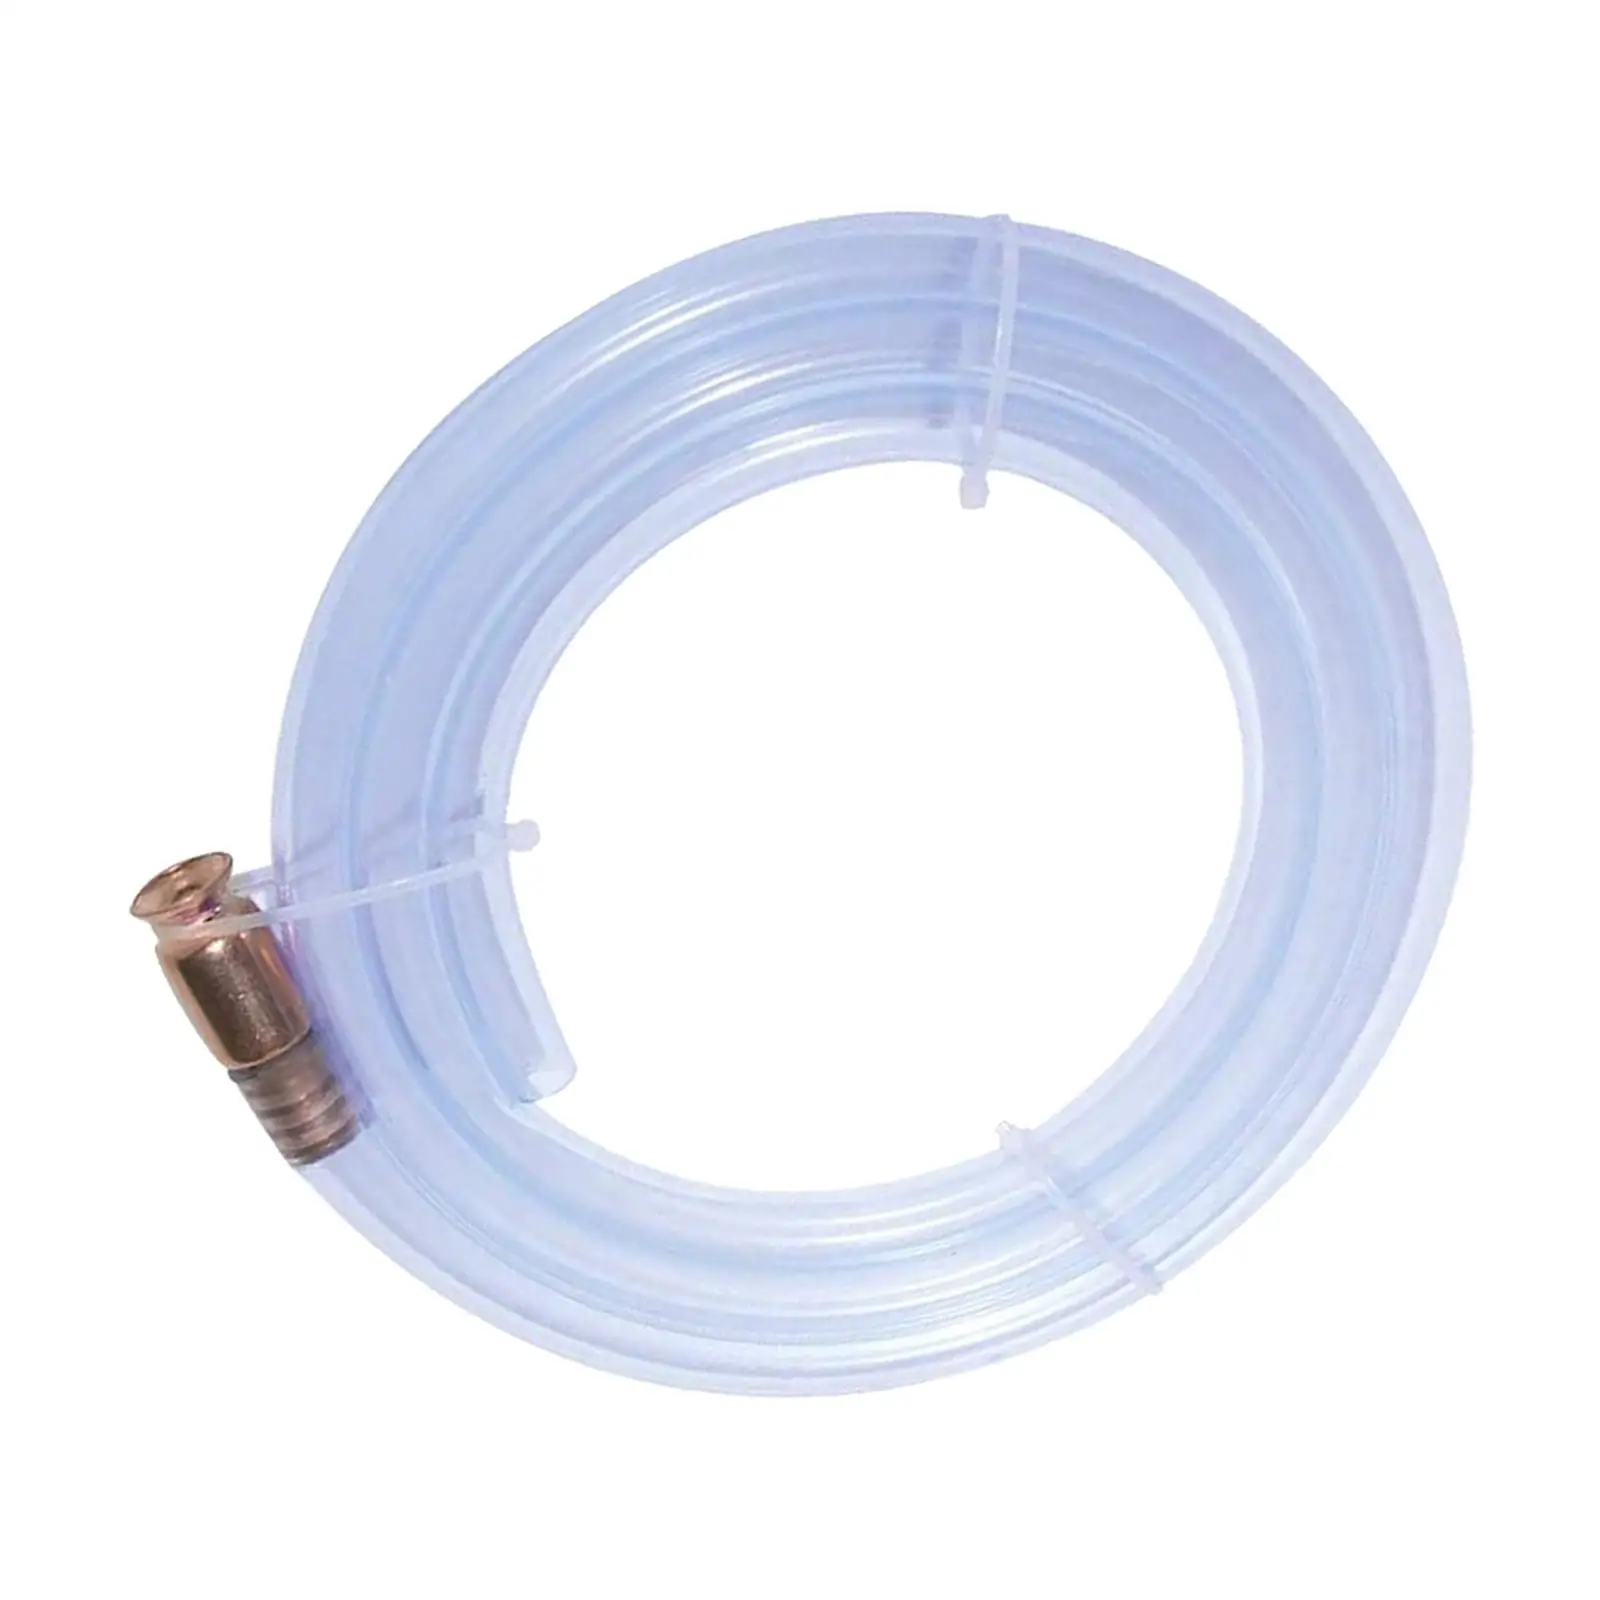 Transparent Siphon Hose 3/4 inch Length 9.9ft for Fuel Transfering Accessory